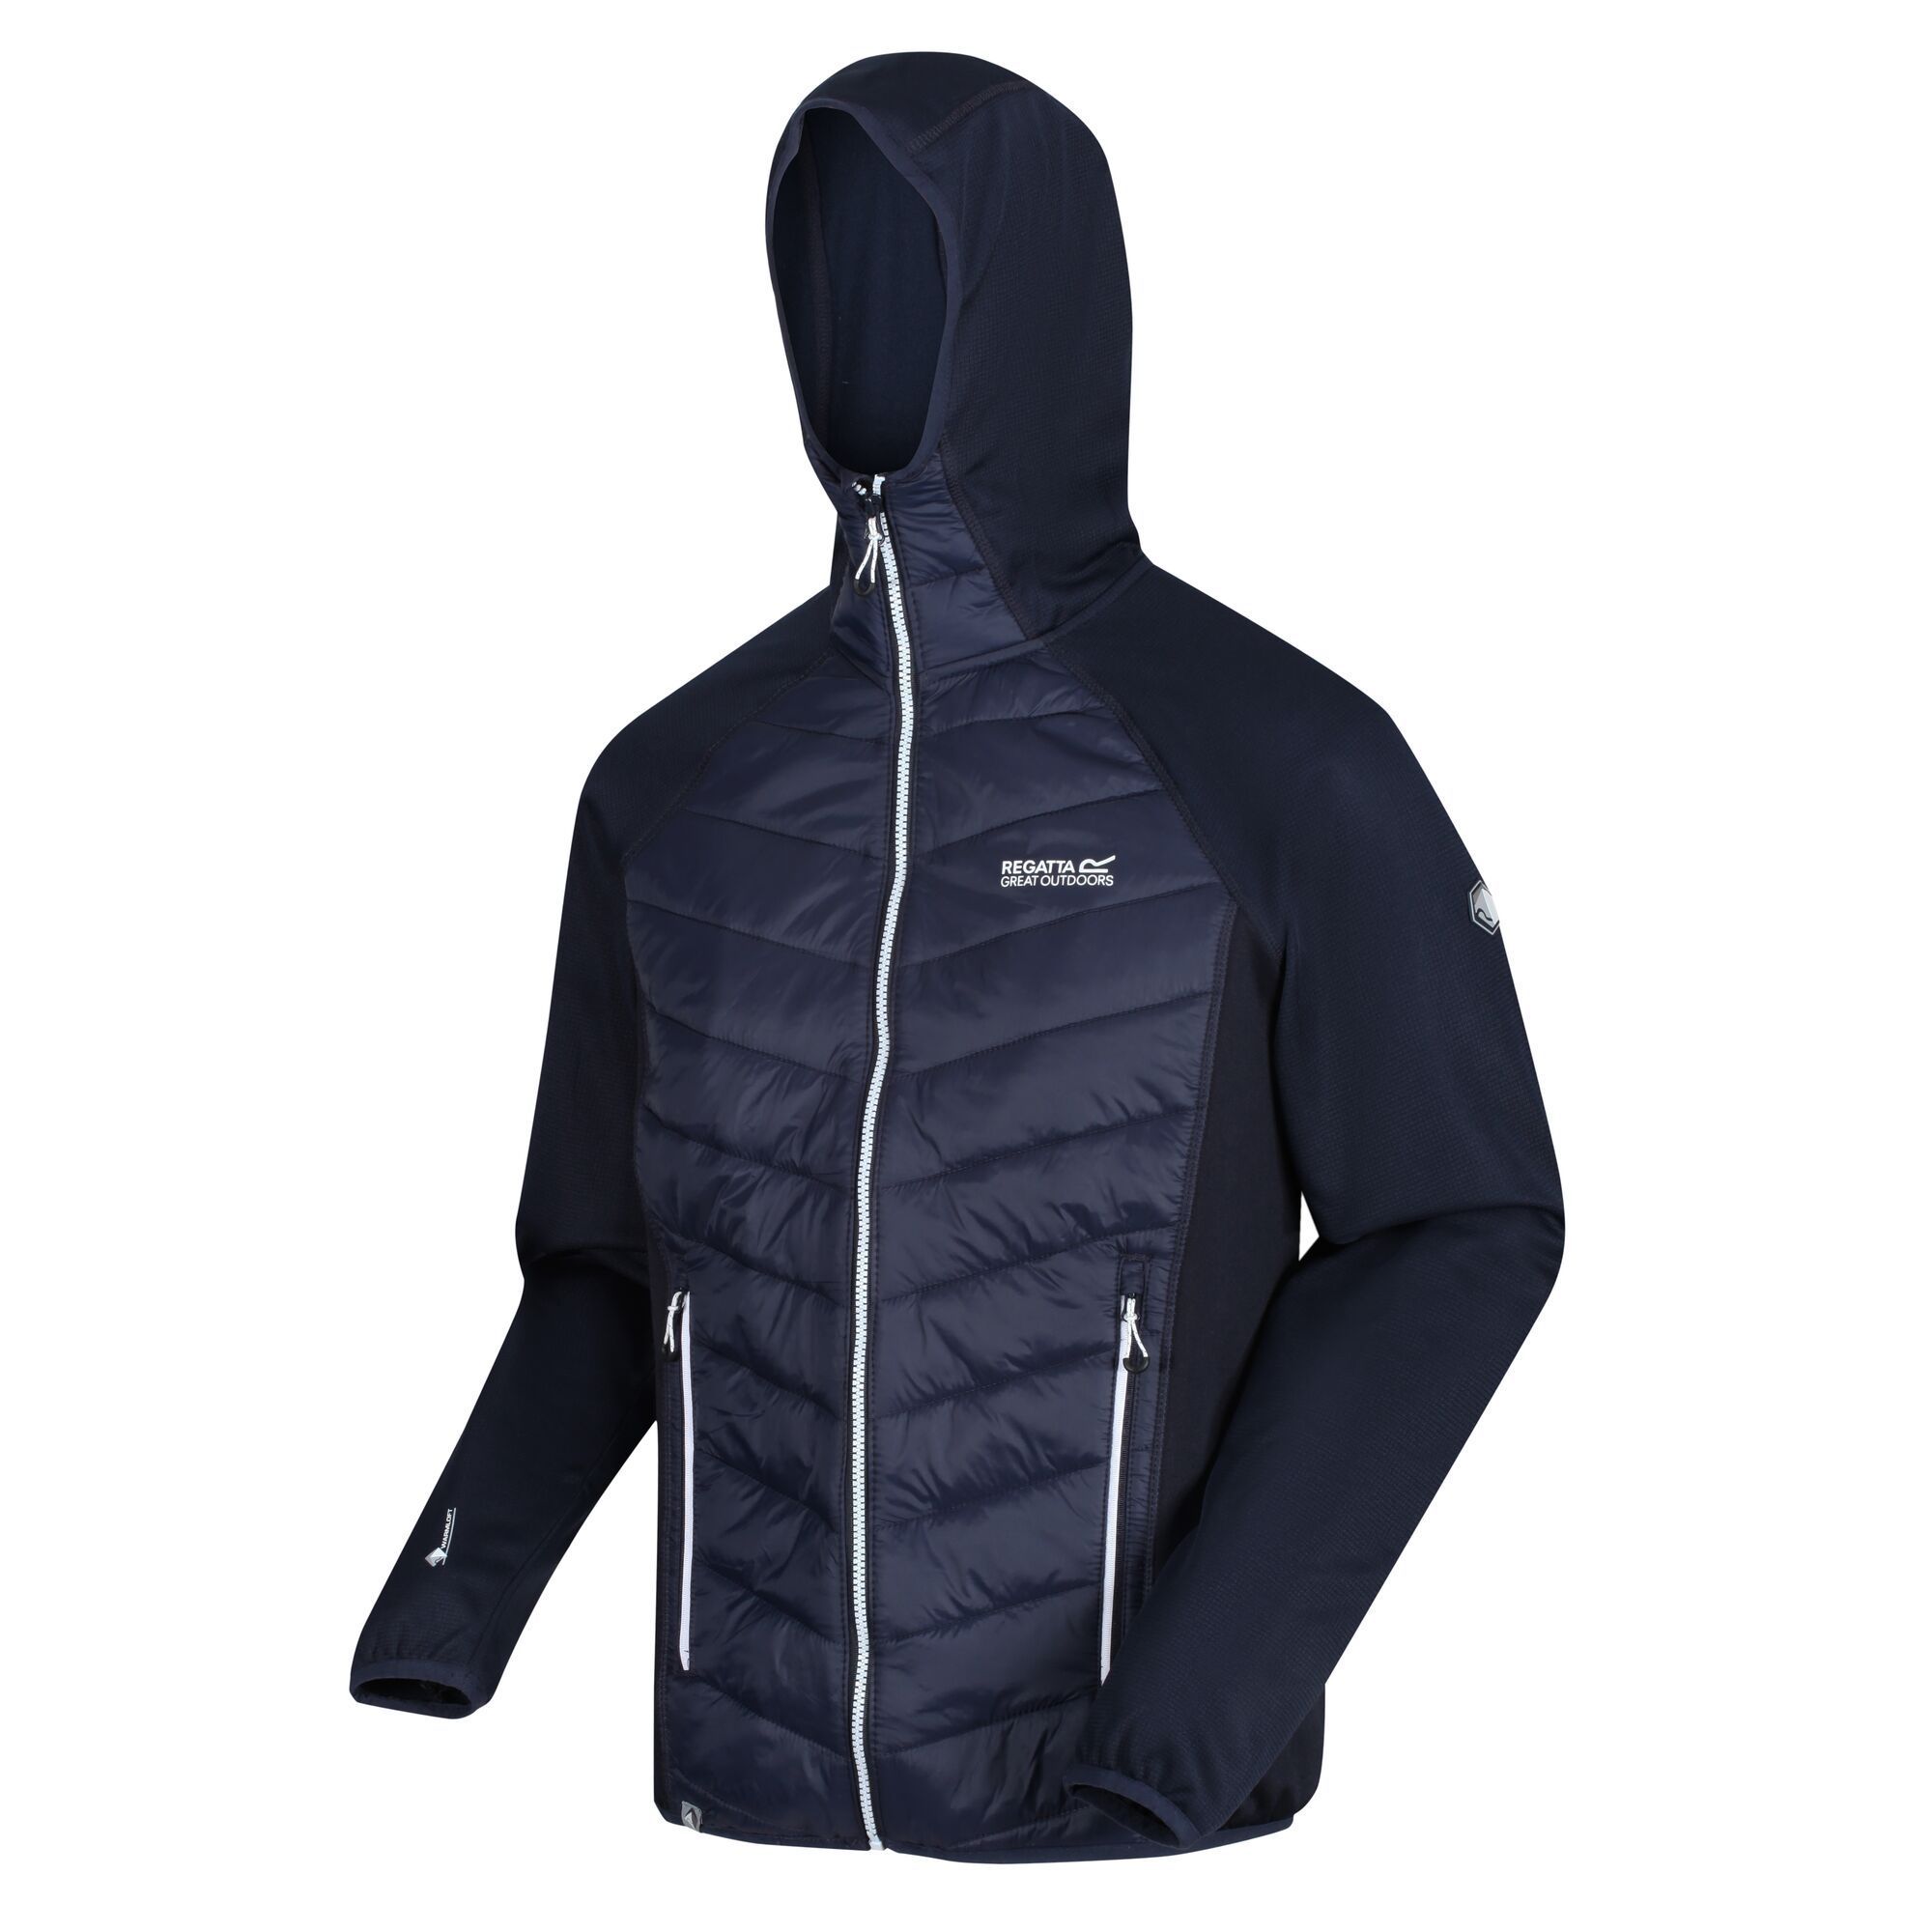 Material: 100% Polyester. Fabric: Extol Stretch, Quilted, Warmloft. Design: Contrast, Logo. Badge, Compressible, Hardwearing, Lightweight, Stretch Binding, Water Repellent. Neckline: Hooded. Sleeve-Type: Raglan. Pockets: 2 Zip Pockets. Fastening: Full Length, Zip, Zip Guard.